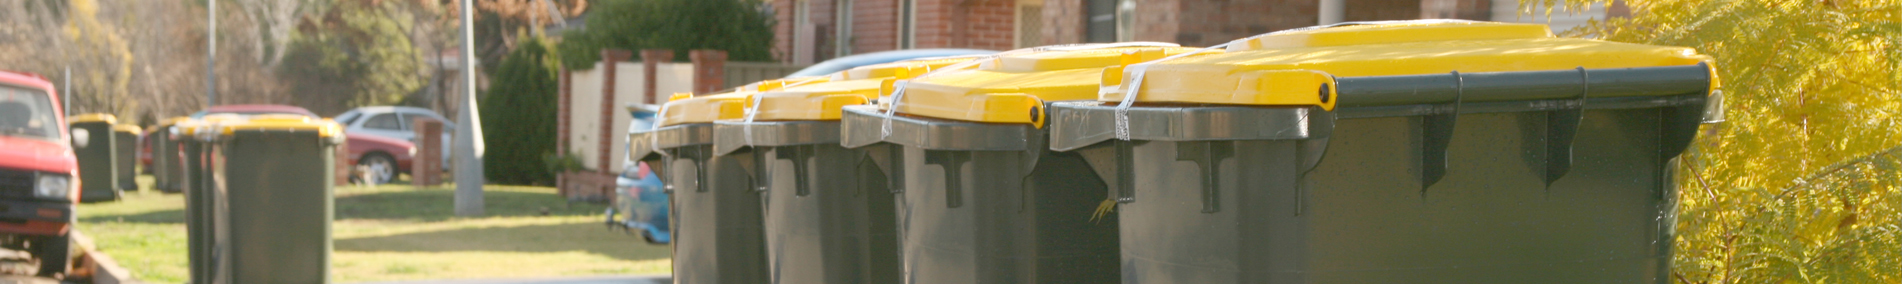 Wheely bins in a row on the kerb